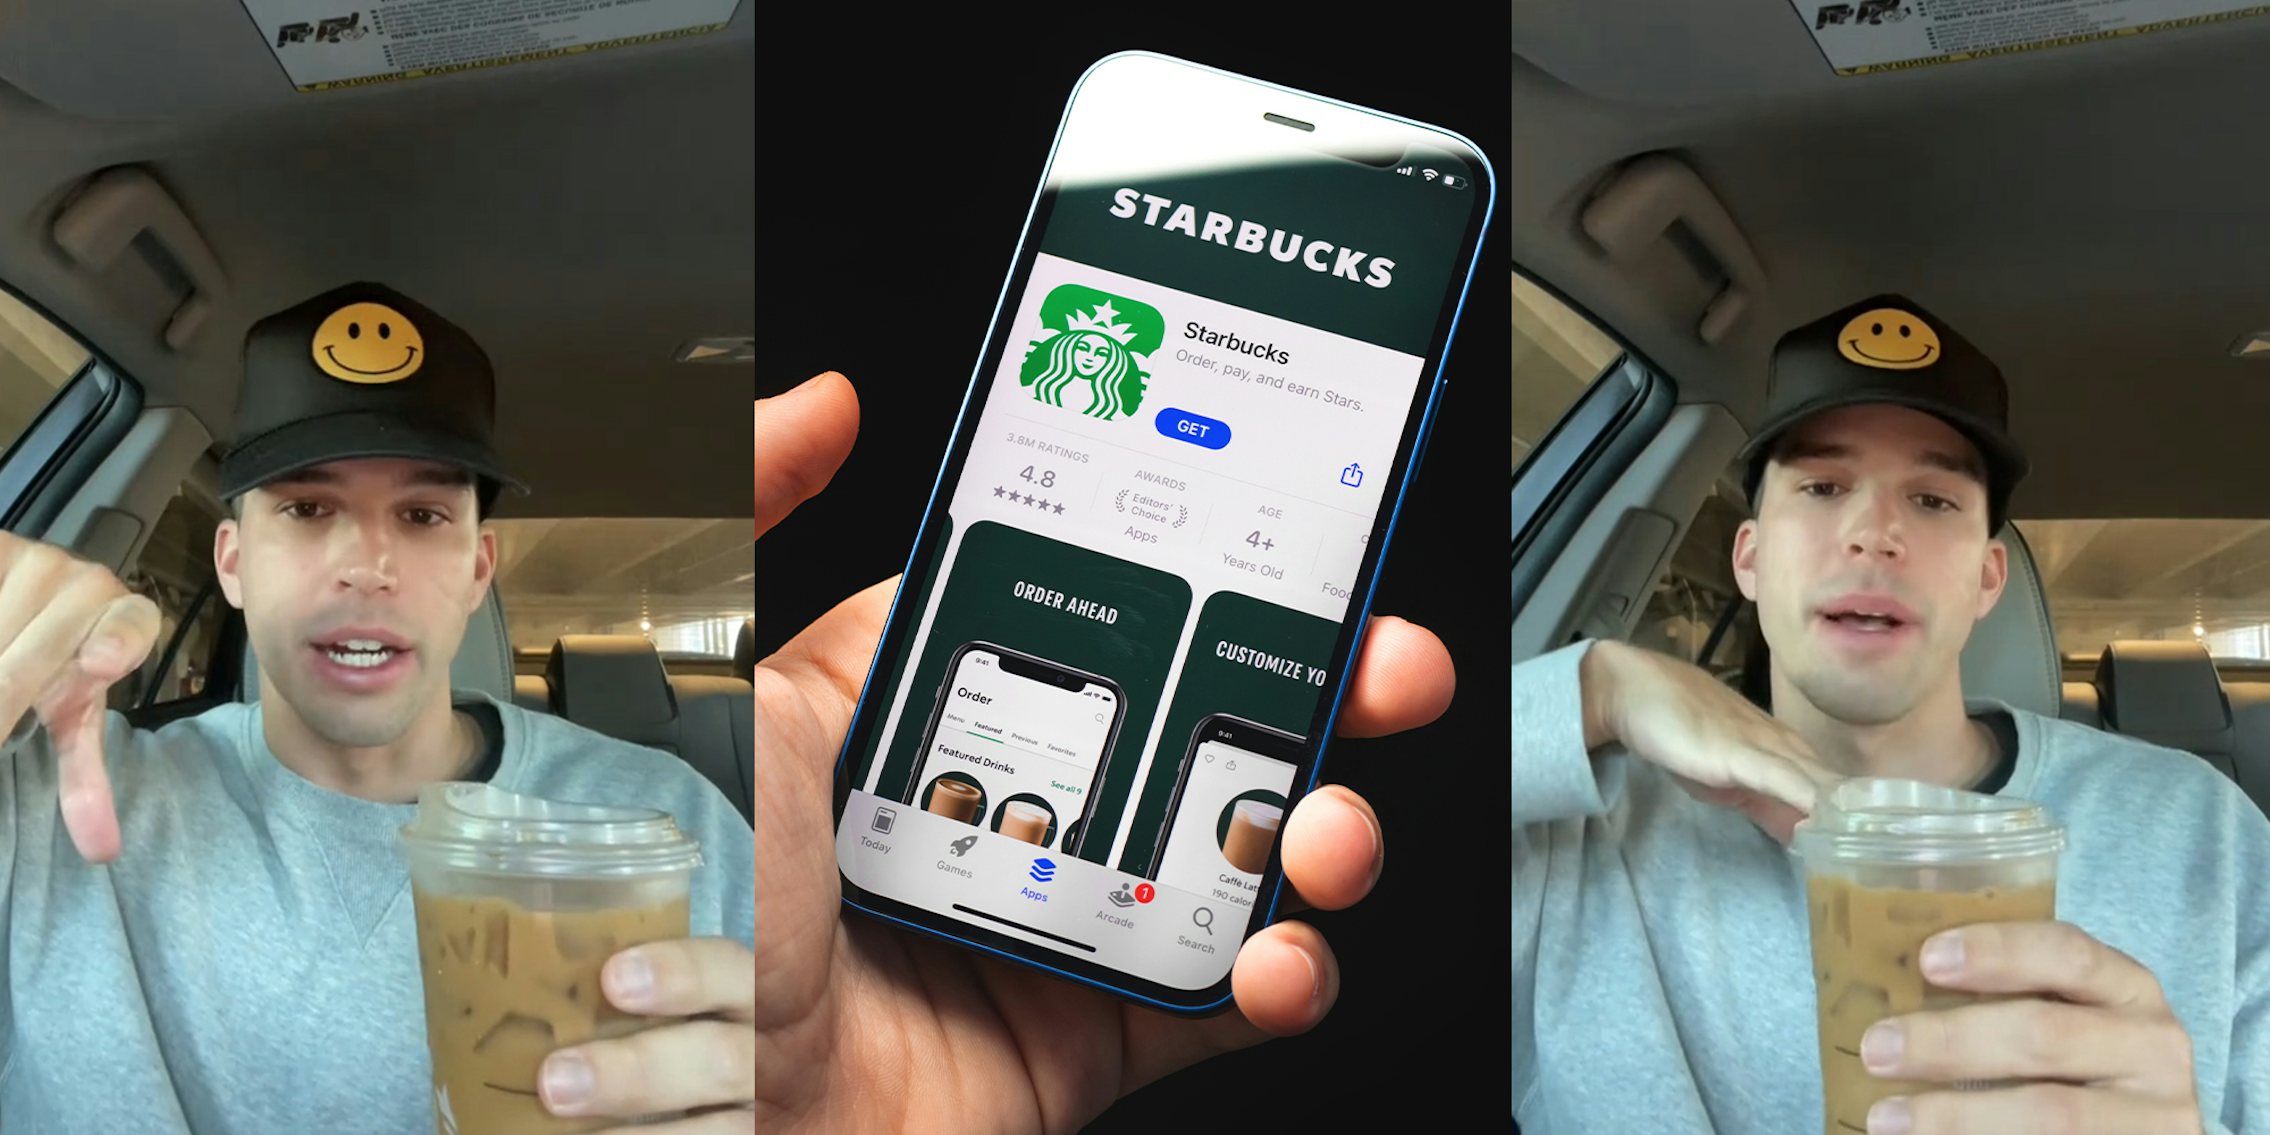 Starbucks Customers says he is earning money with the app